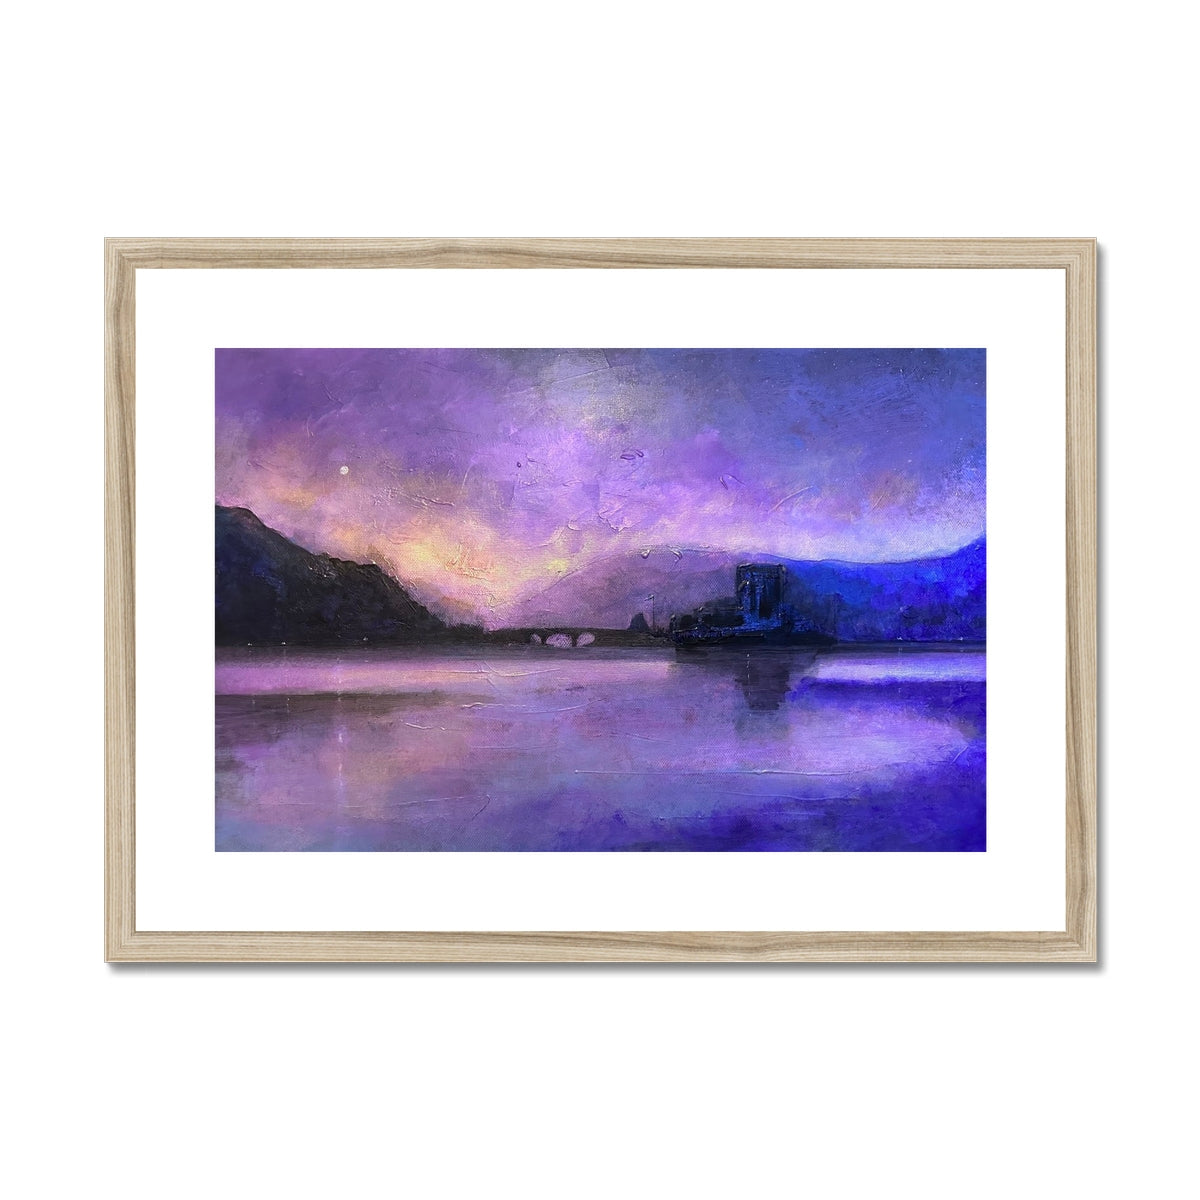 Eilean Donan Castle Moonset Painting | Framed & Mounted Prints From Scotland-Framed & Mounted Prints-Historic & Iconic Scotland Art Gallery-A2 Landscape-Natural Frame-Paintings, Prints, Homeware, Art Gifts From Scotland By Scottish Artist Kevin Hunter